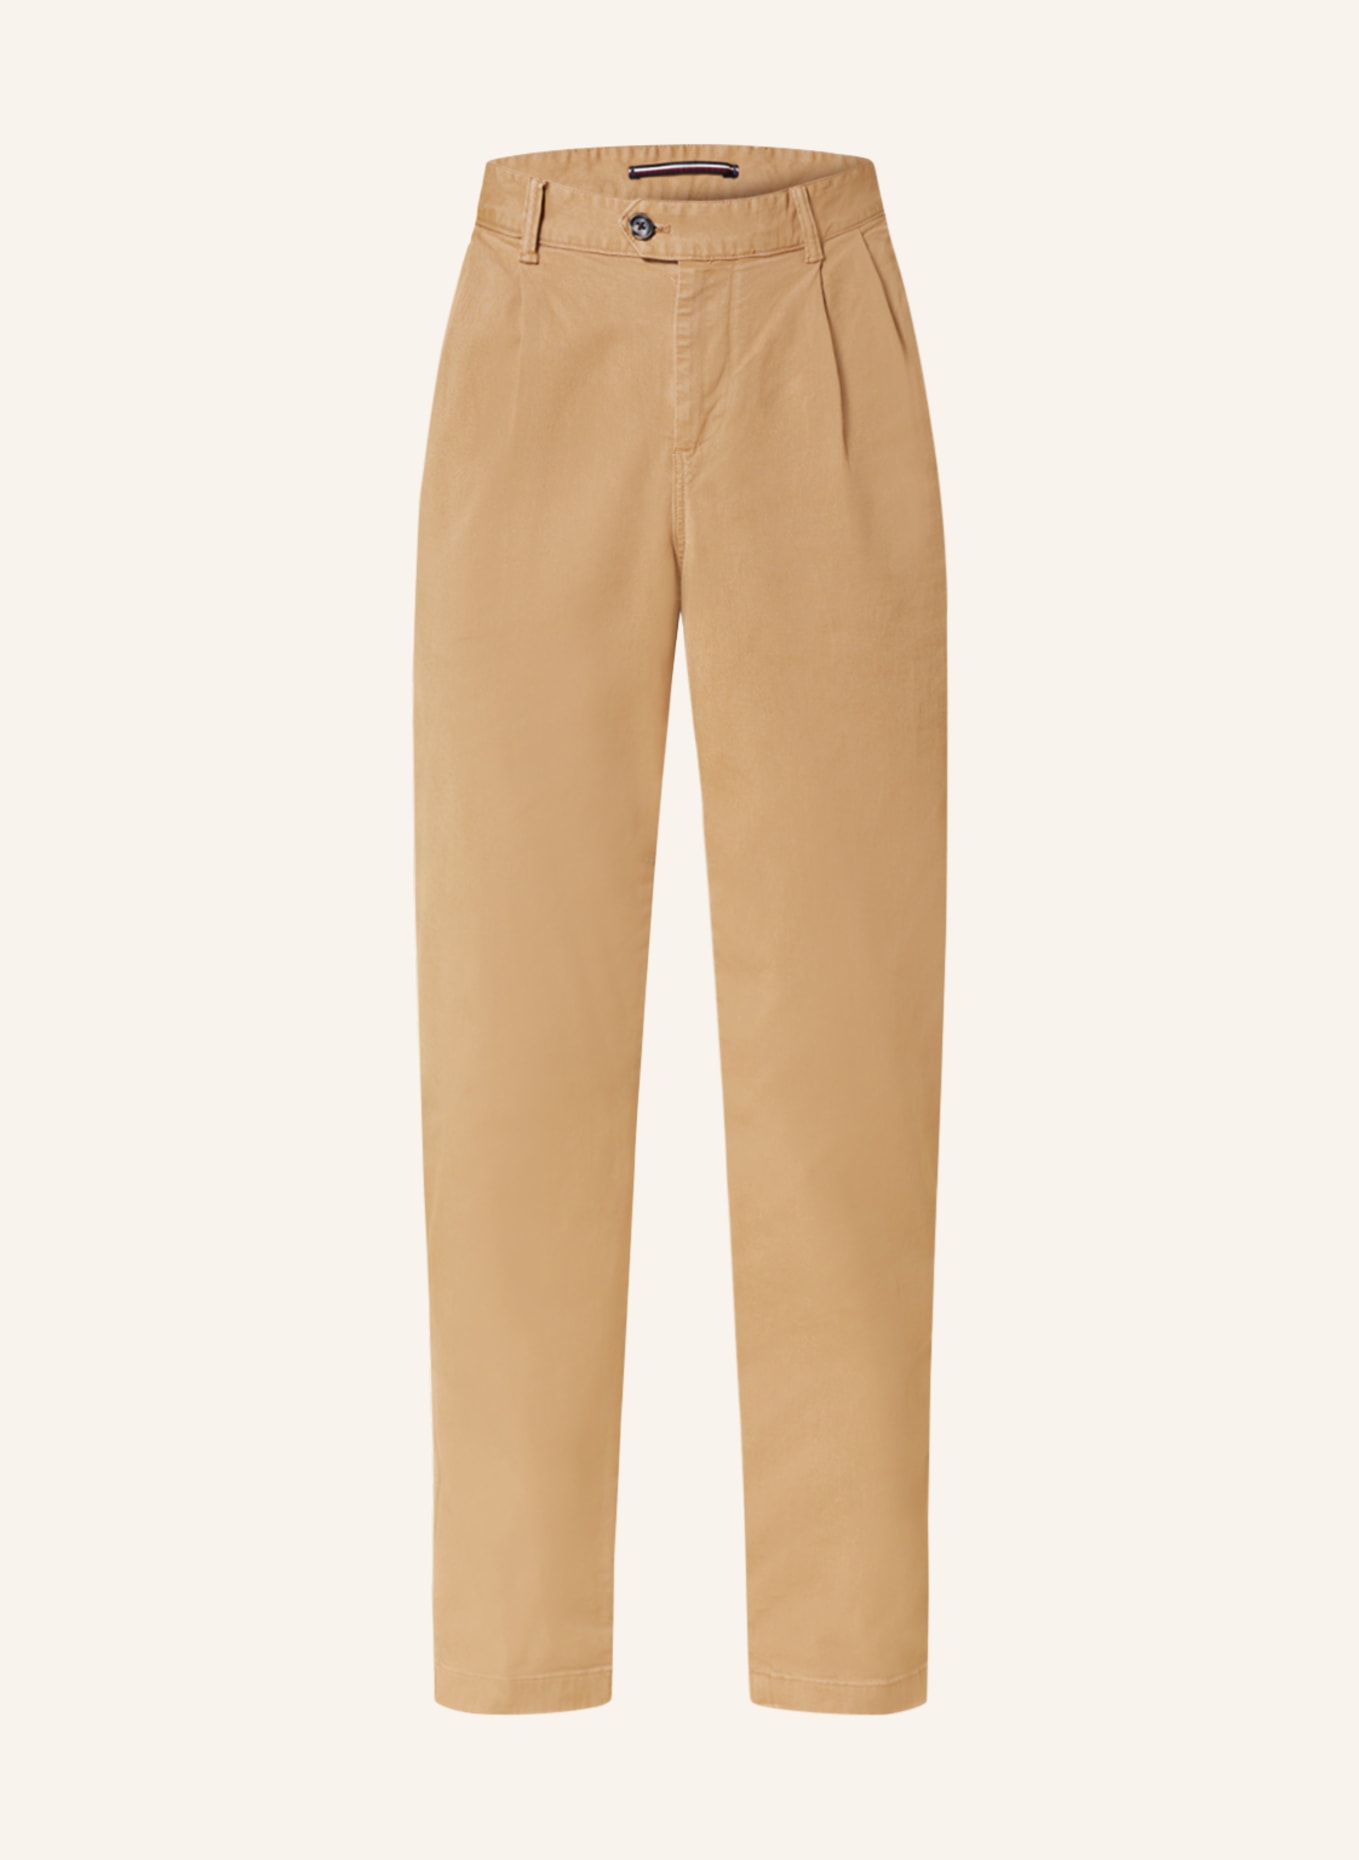 TOMMY HILFIGER Chino Wide Tapered Fit, Farbe: CAMEL (Bild 1)